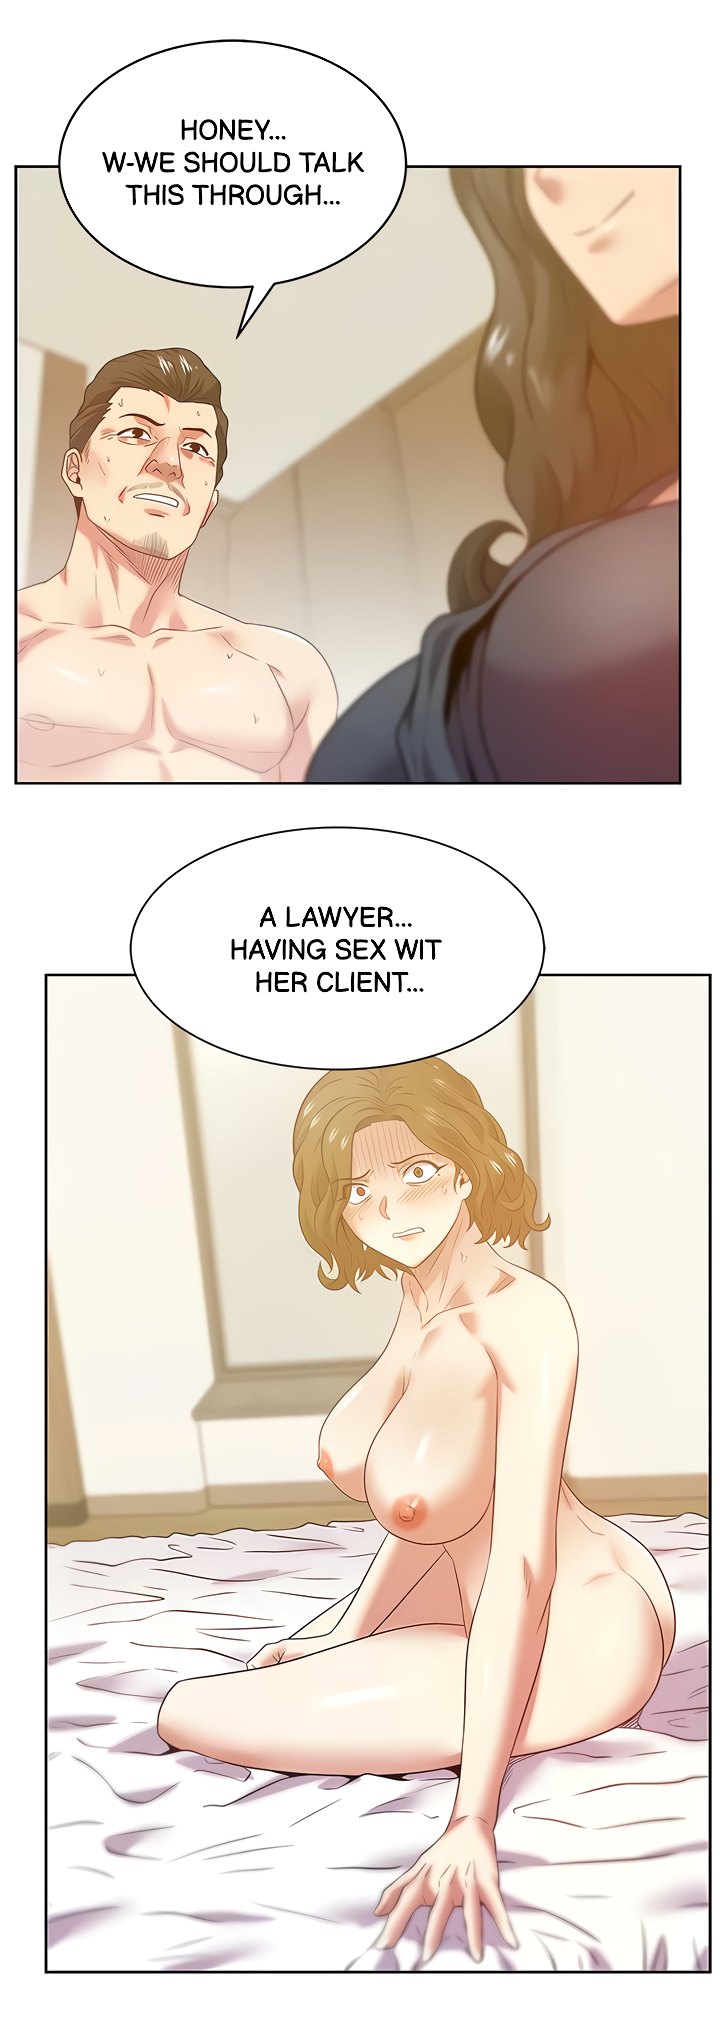 My Wifes Friend - Chapter 89 pic